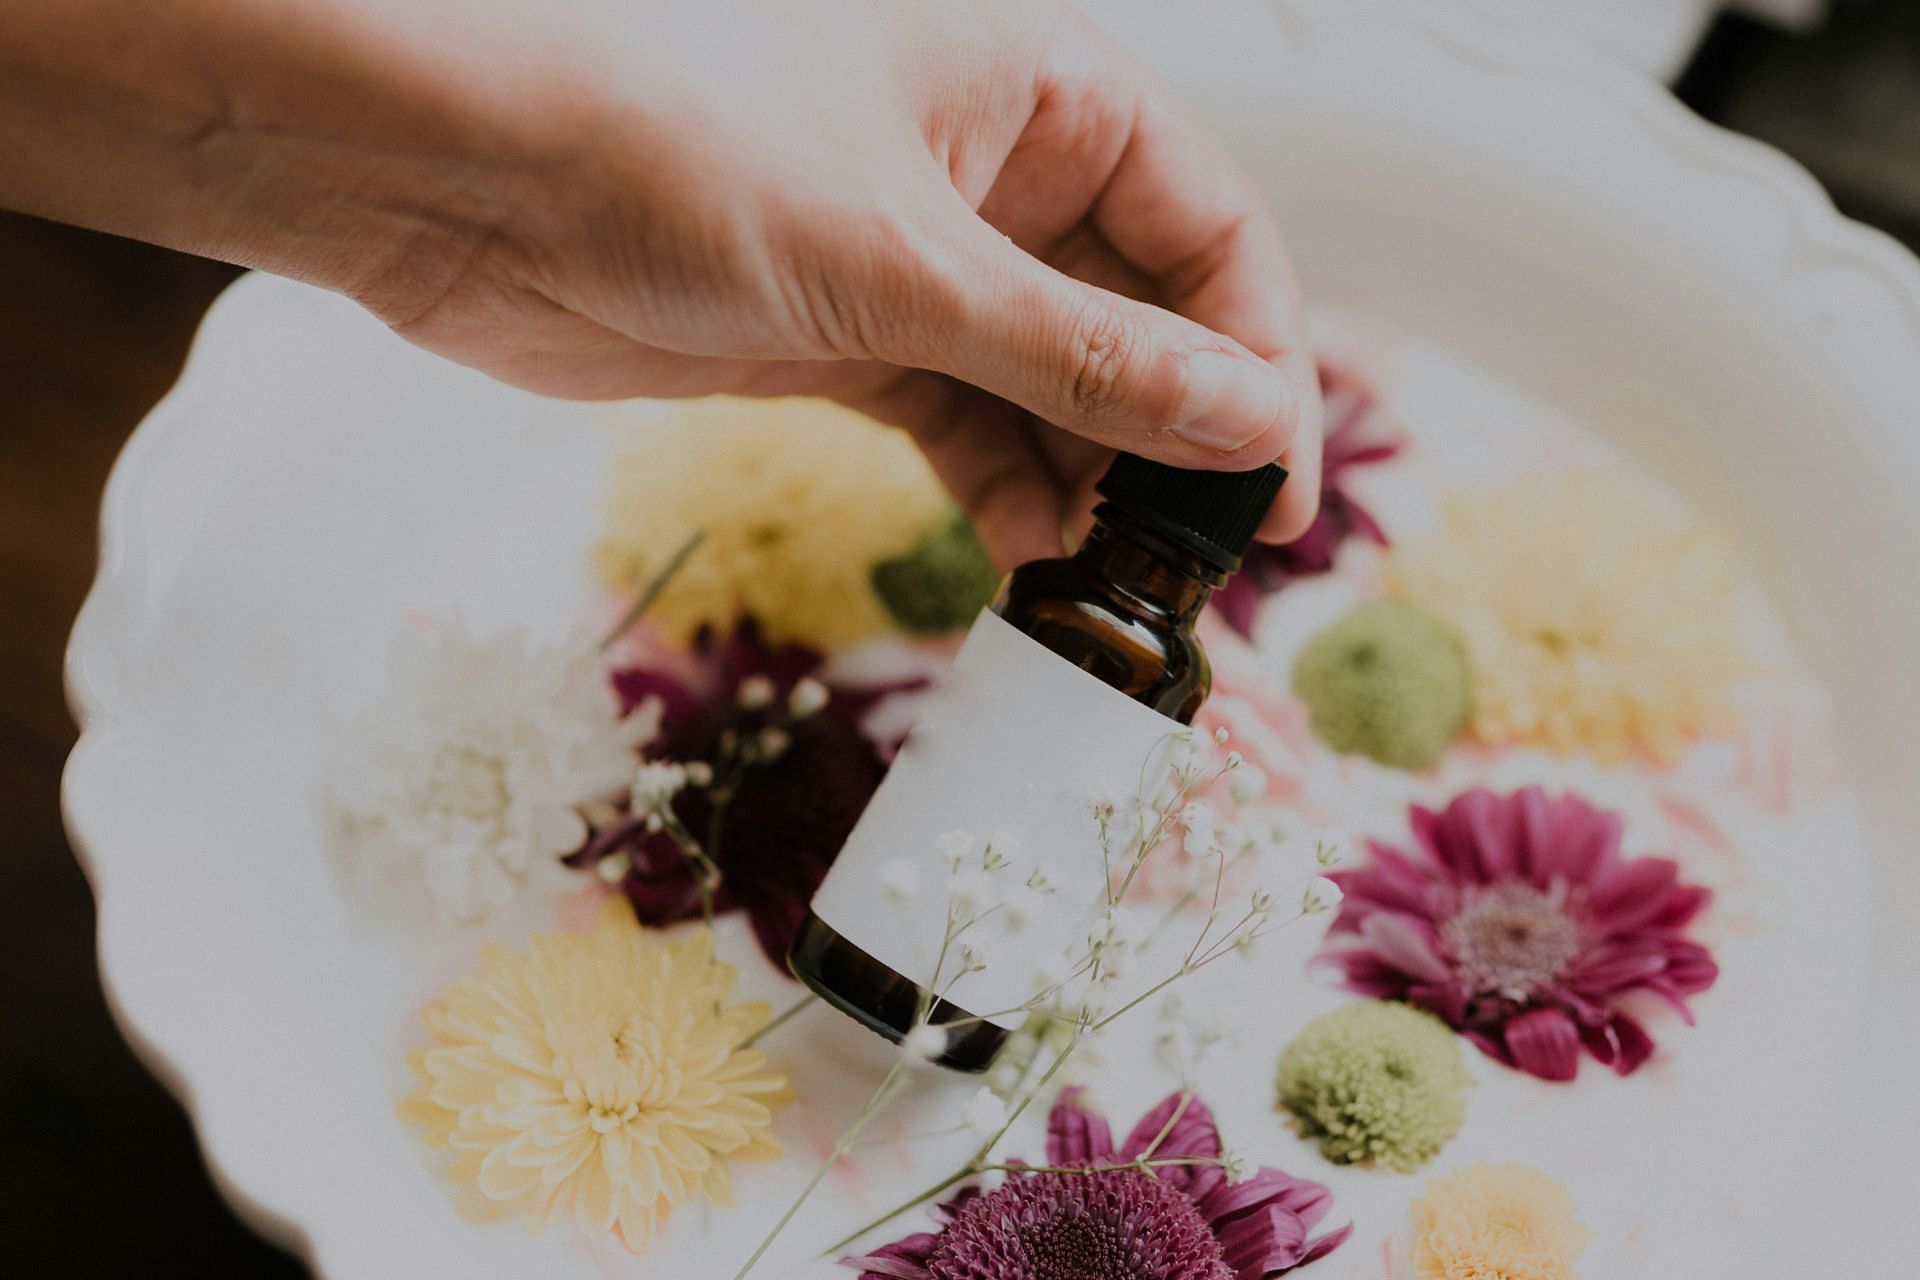 A natural oil with almost no side effects(Image by Priscilla Du Preez/Unsplash)